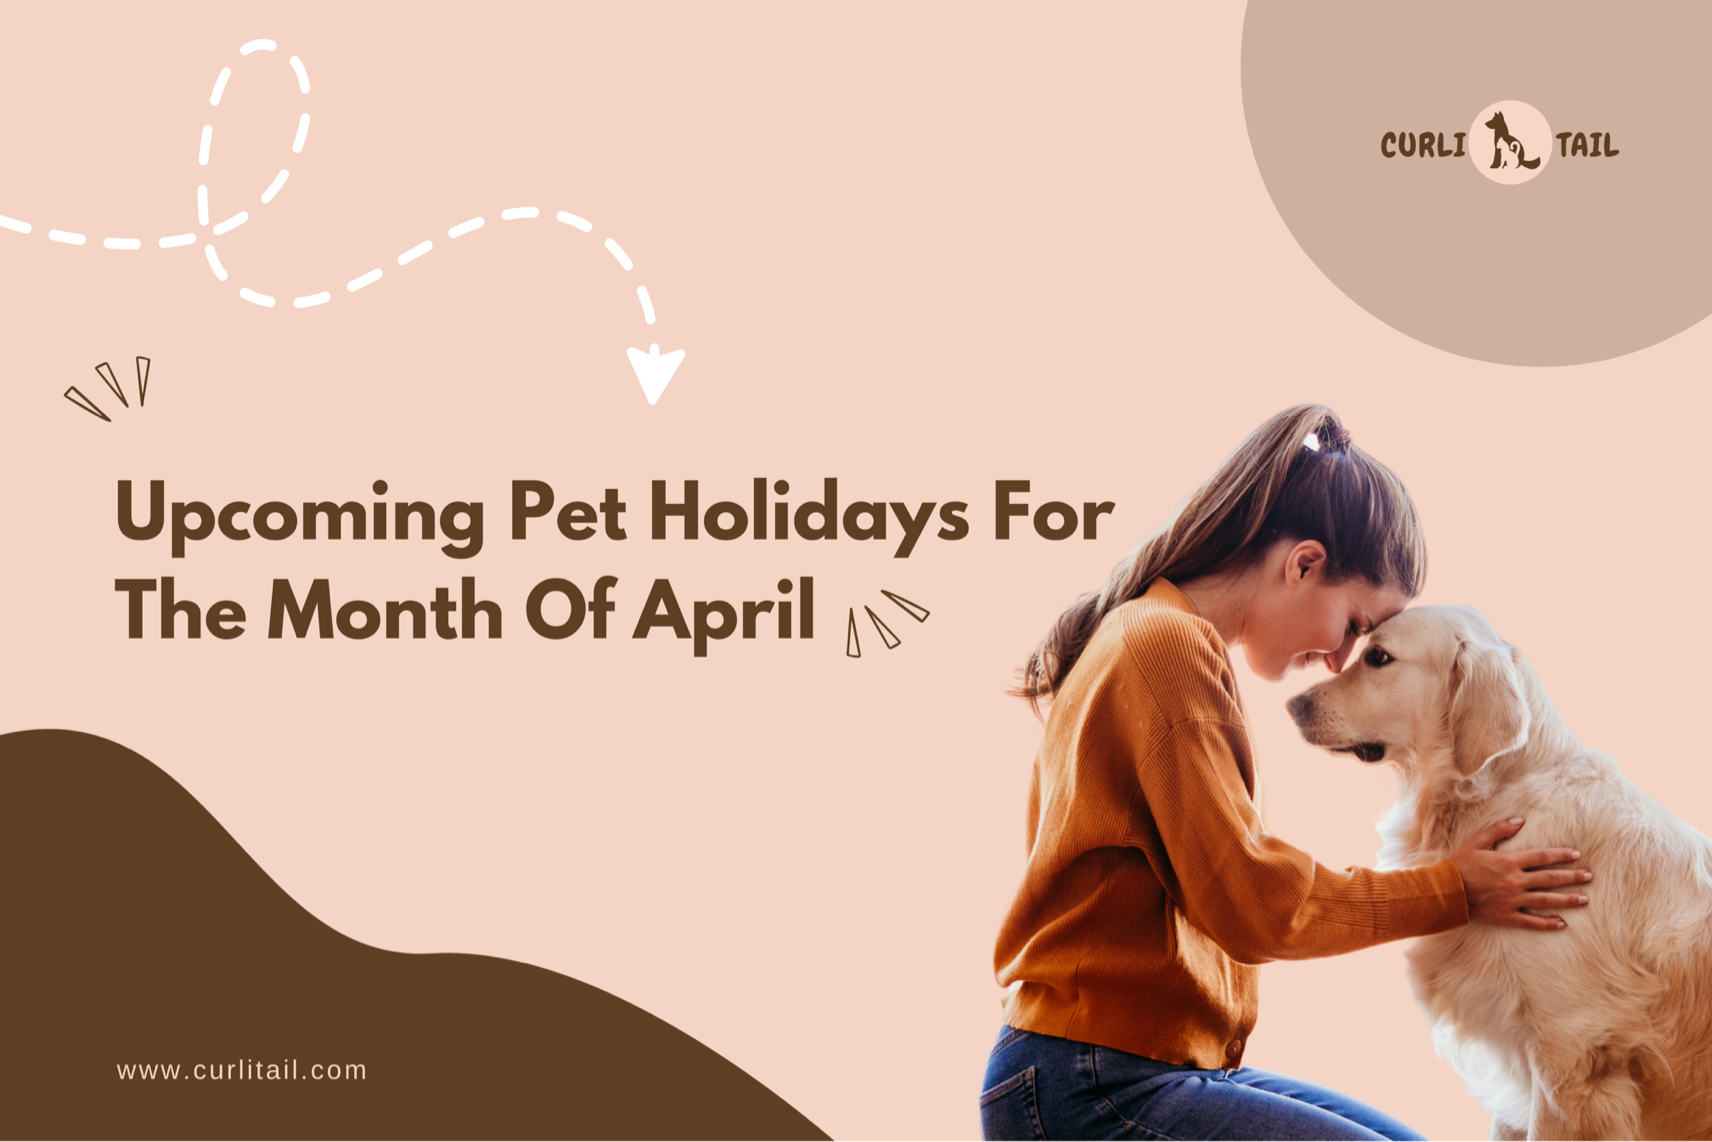 Pet holidays for the month of April